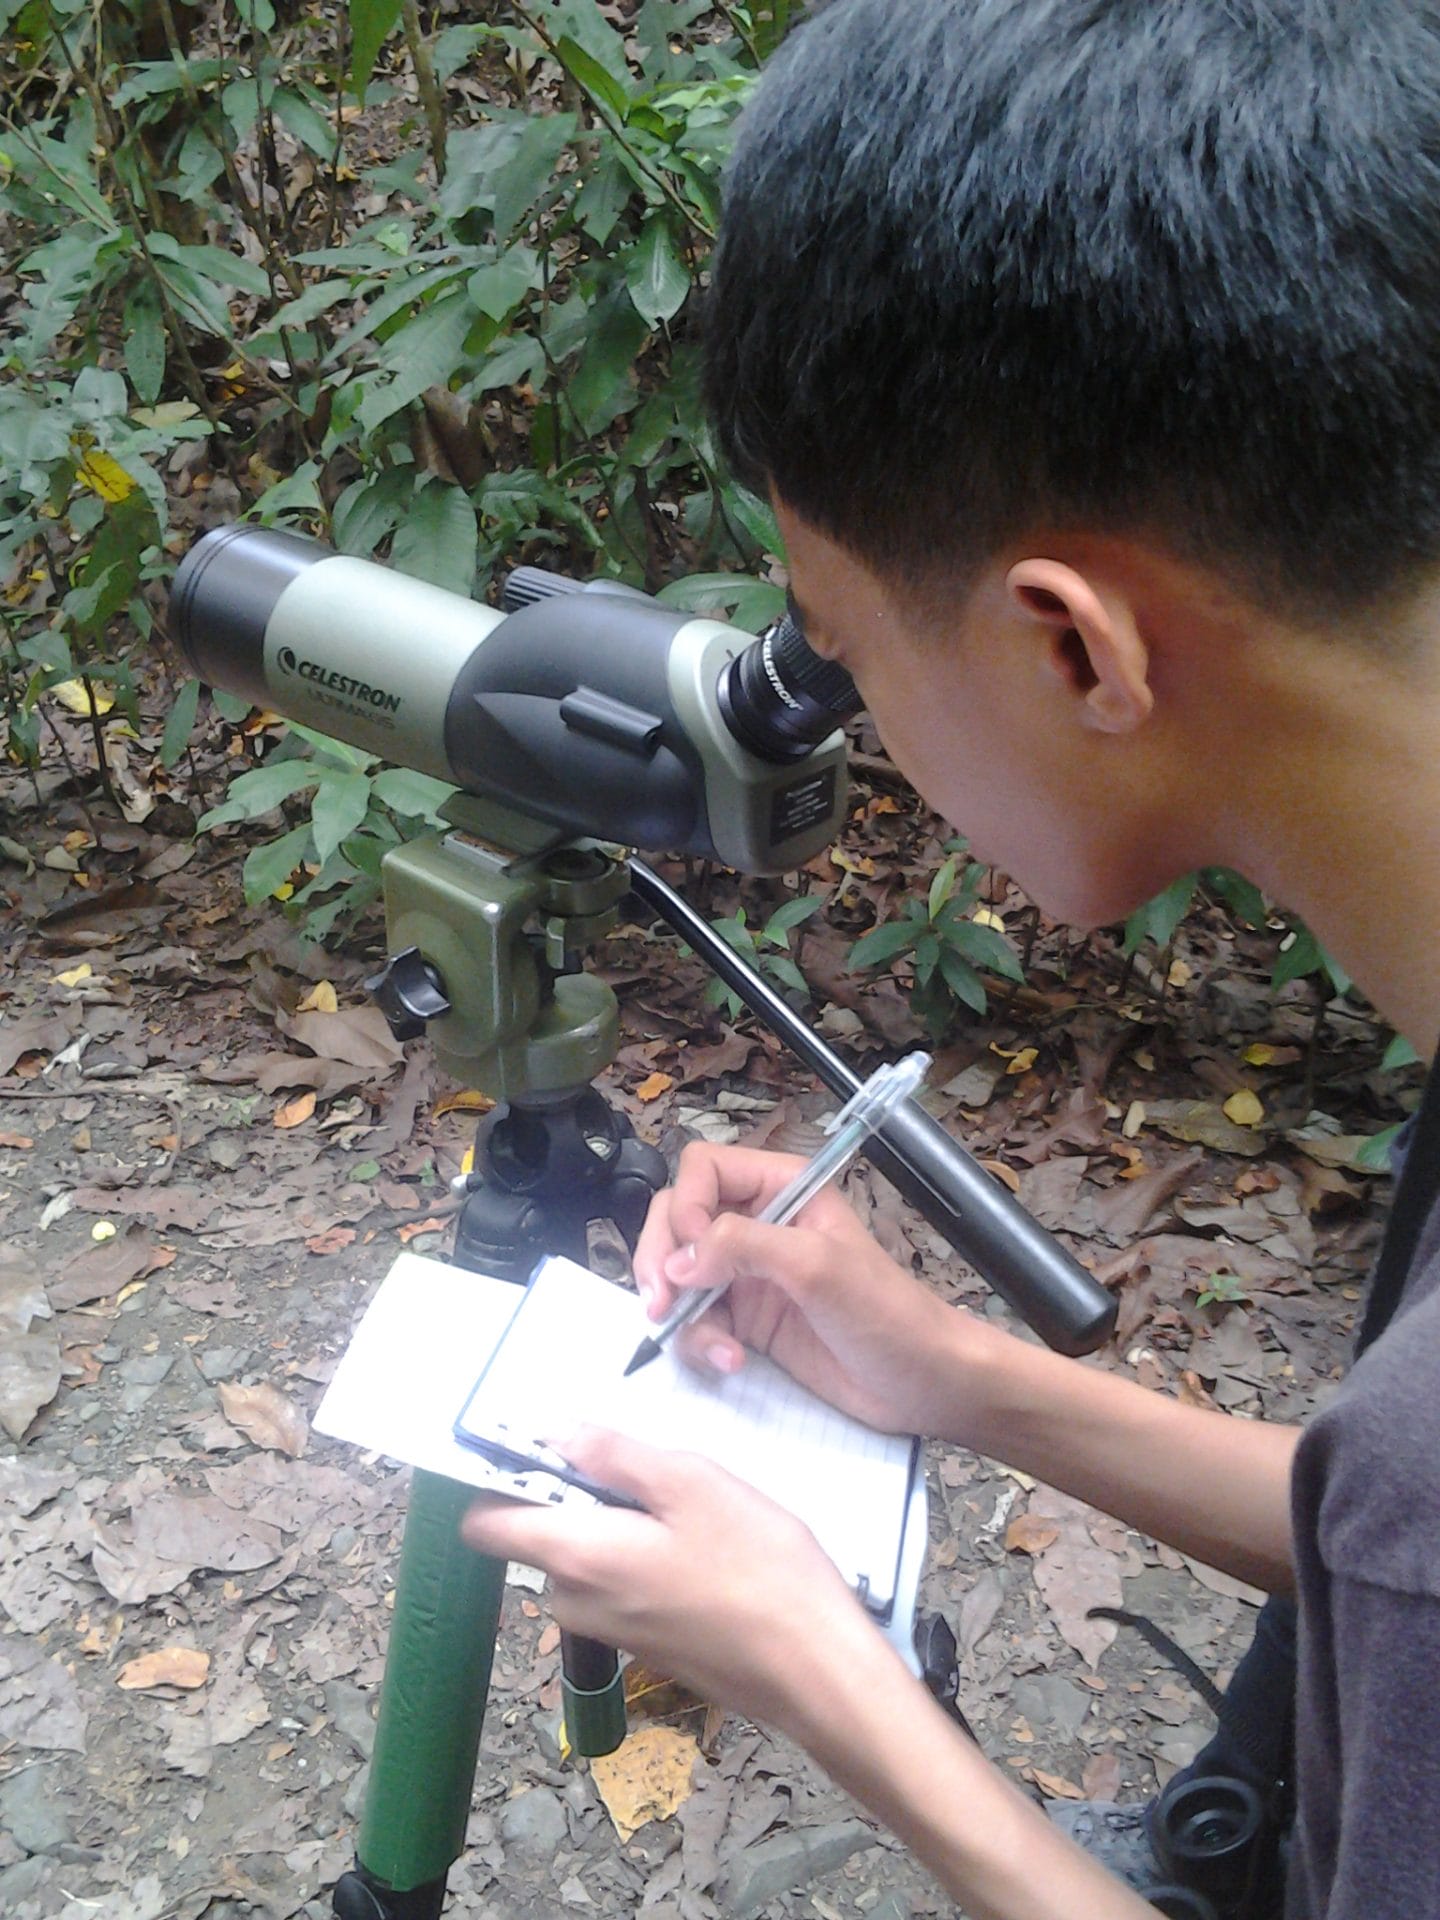 Sketching the Spotted Wood-Kingfisher through the scope. Photo by Maia Tanedo.